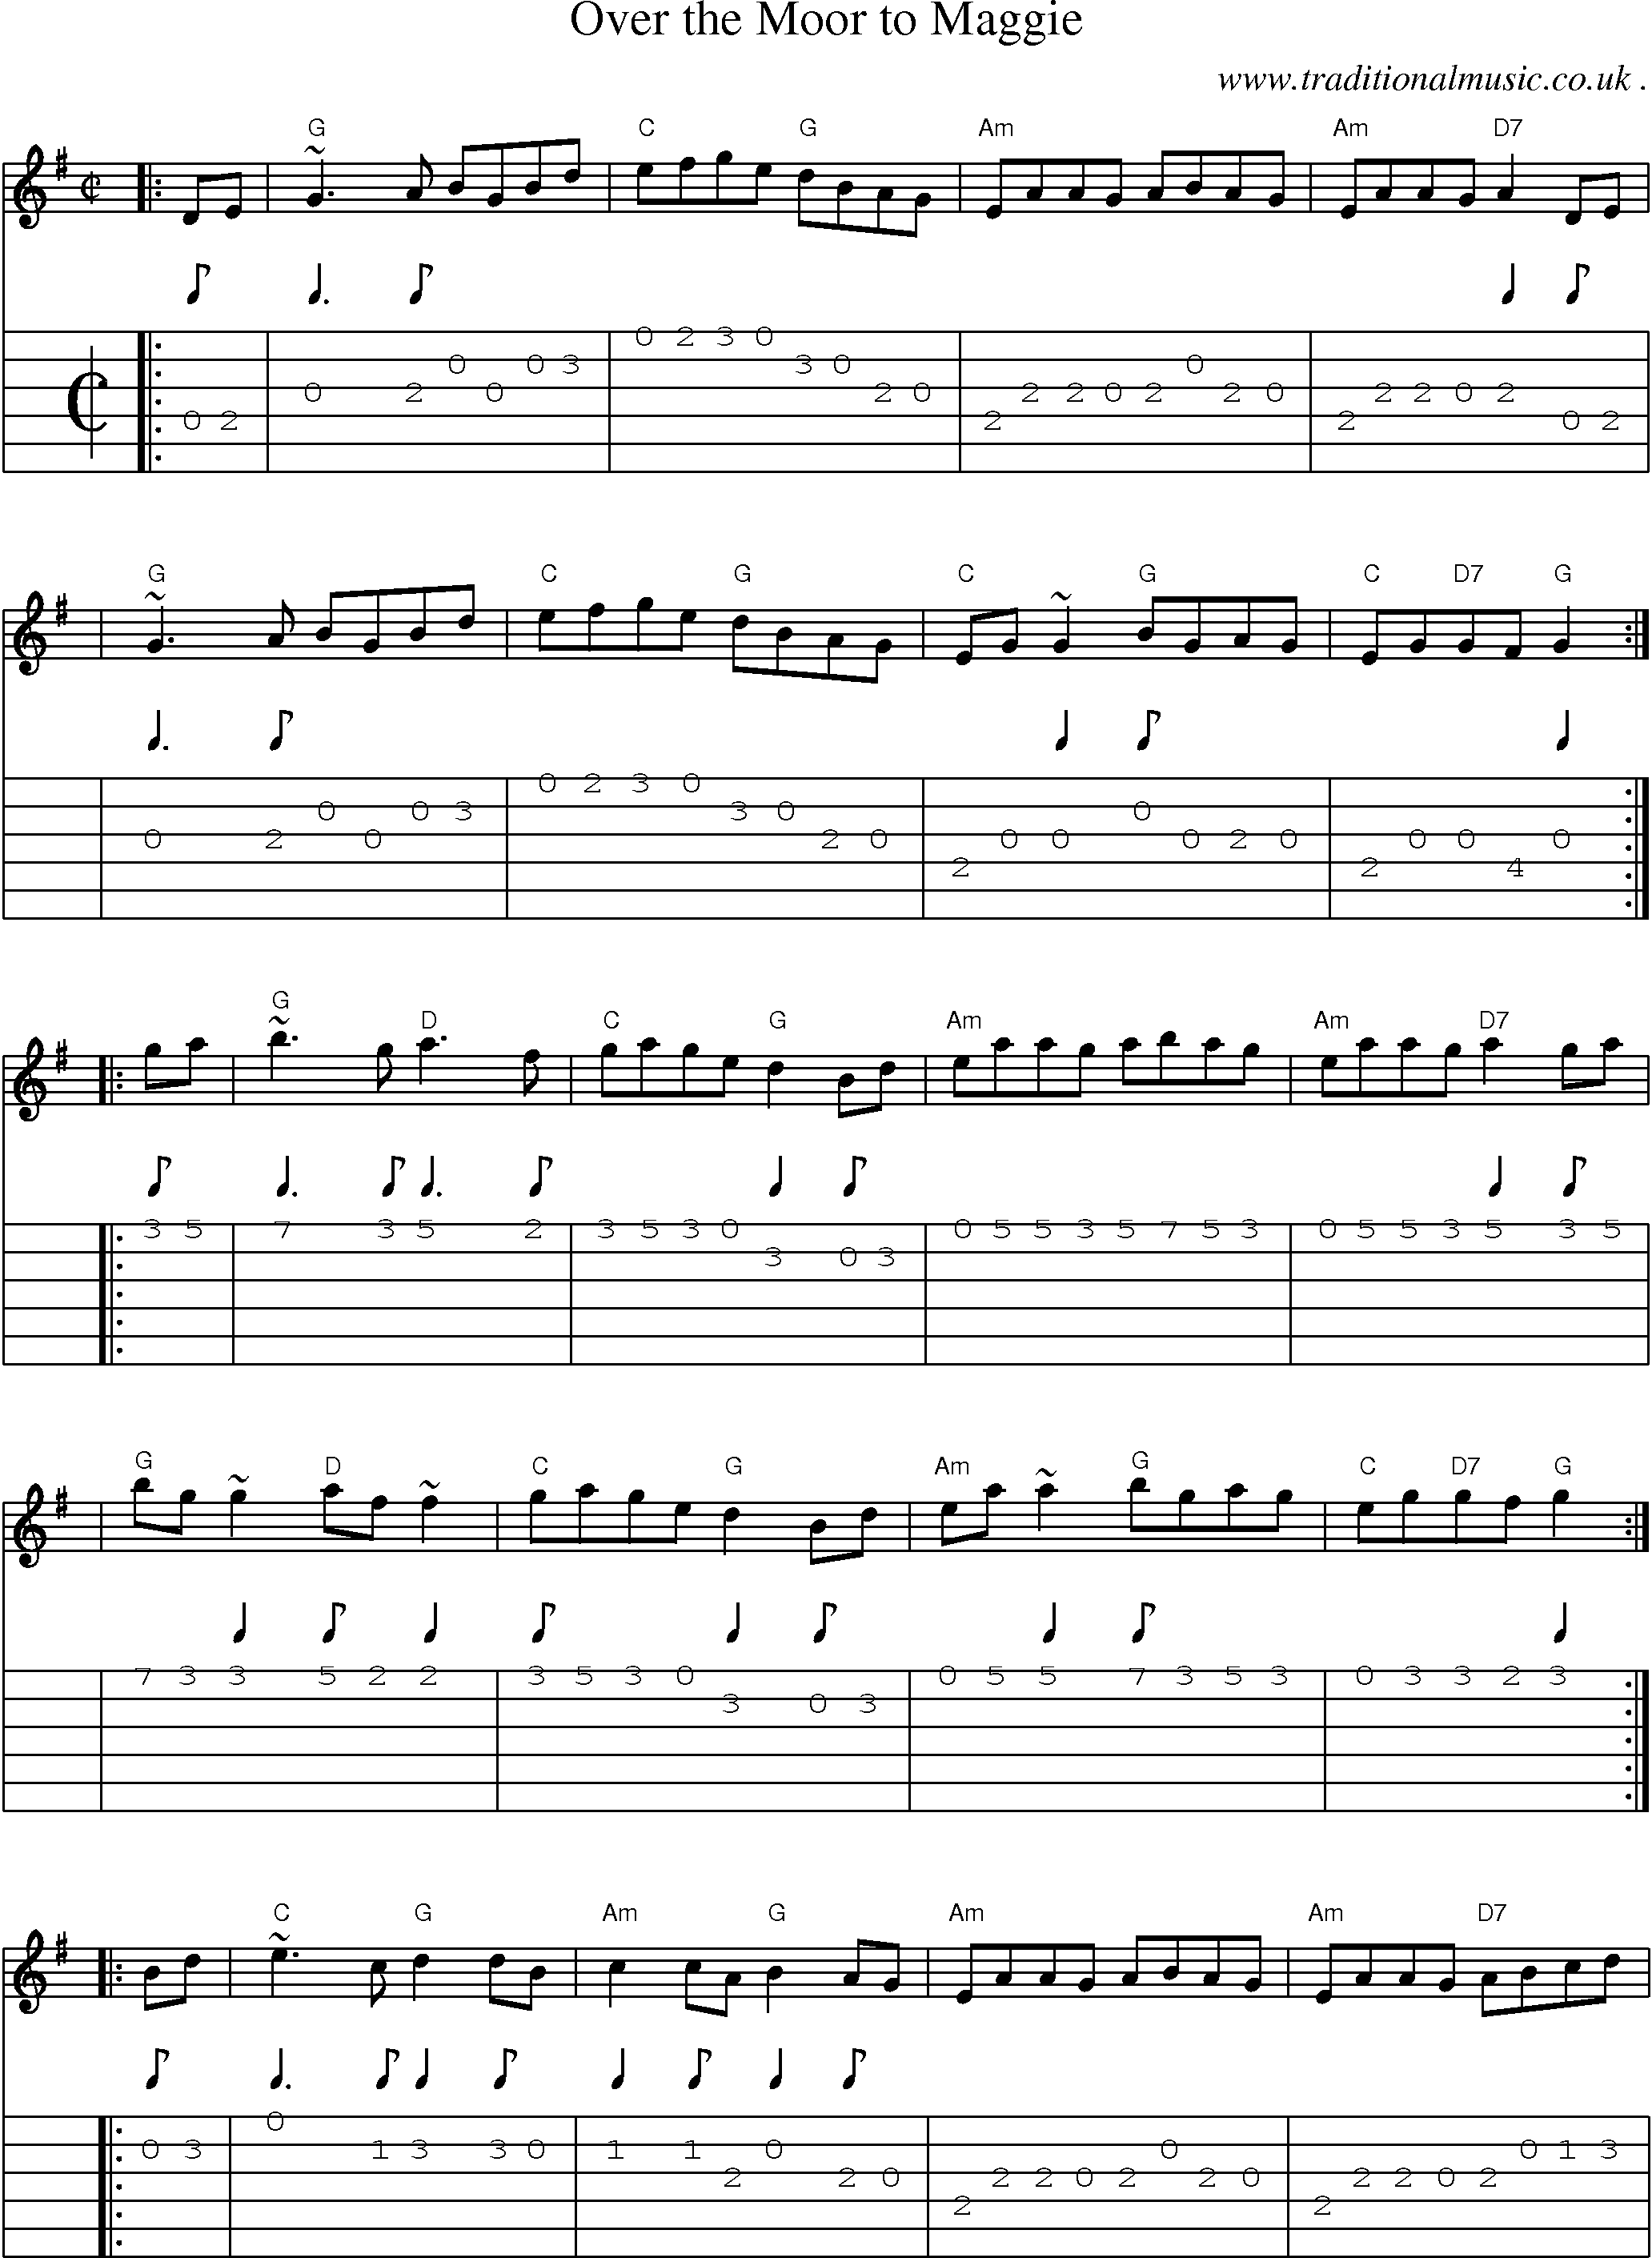 Sheet-music  score, Chords and Guitar Tabs for Over The Moor To Maggie